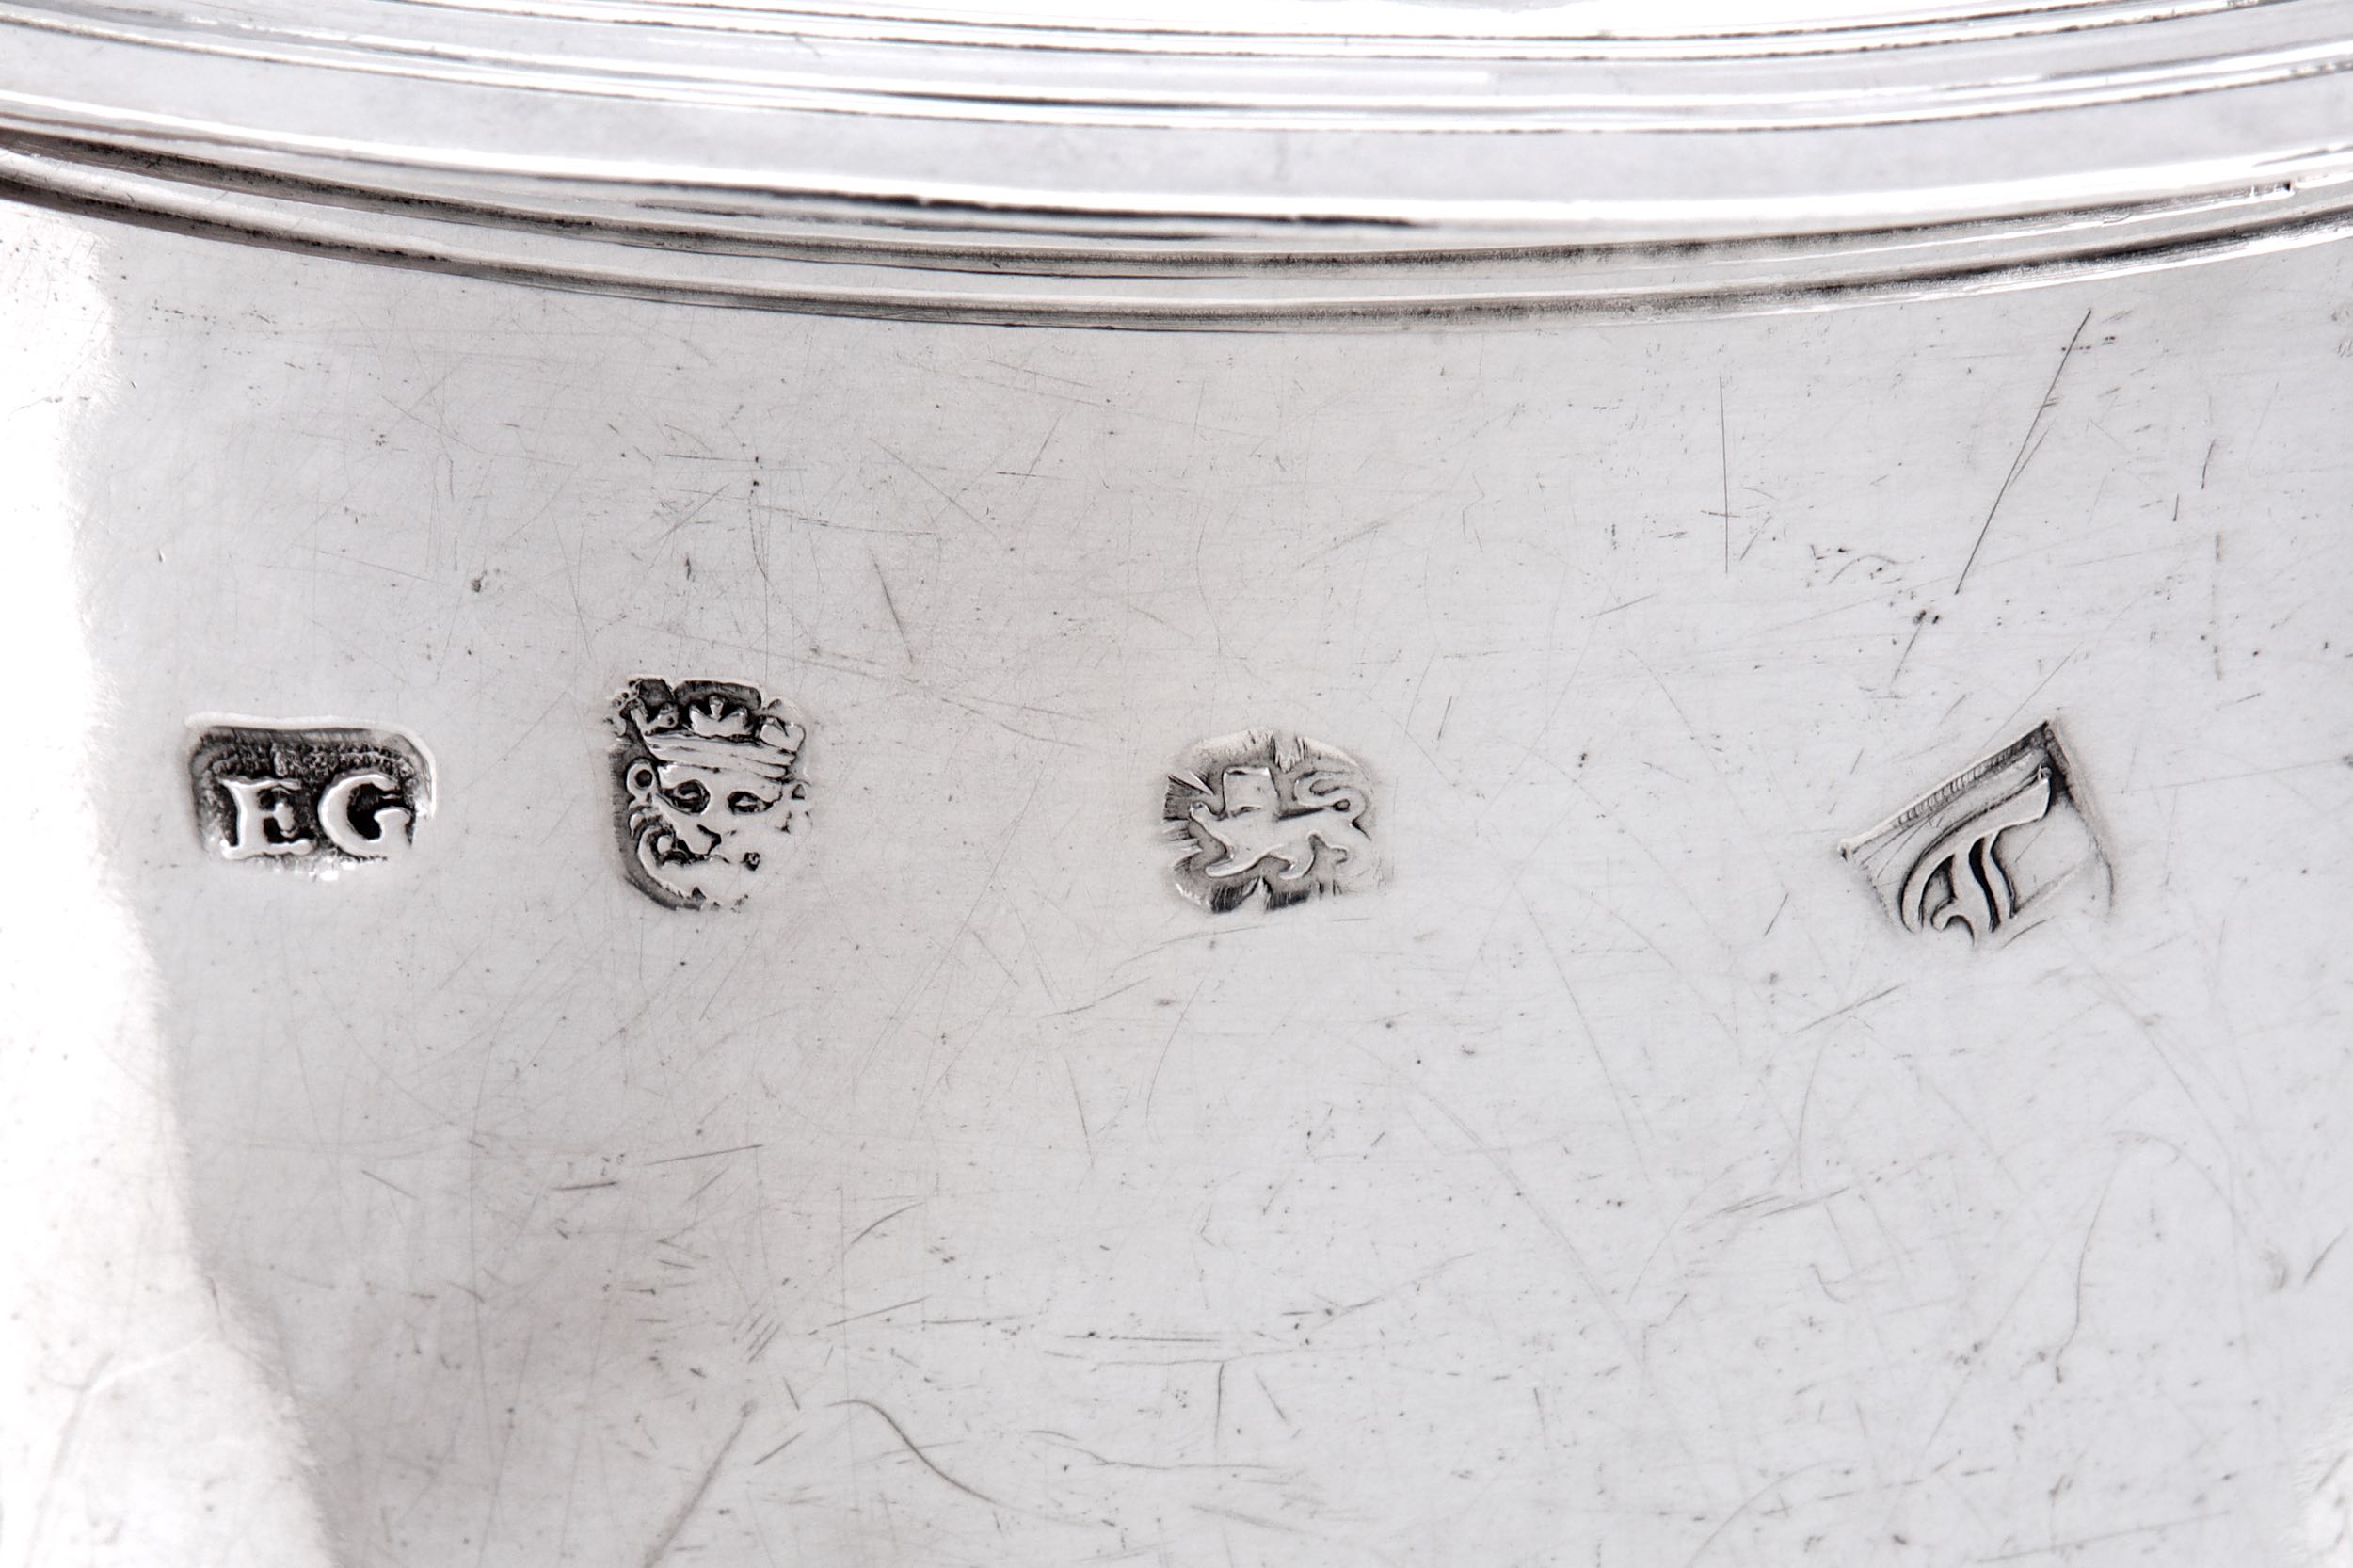 A Charles II sterling silver tankard, London 1676 by E G in a rectangle, attributed to Edward Gladwi - Image 6 of 12